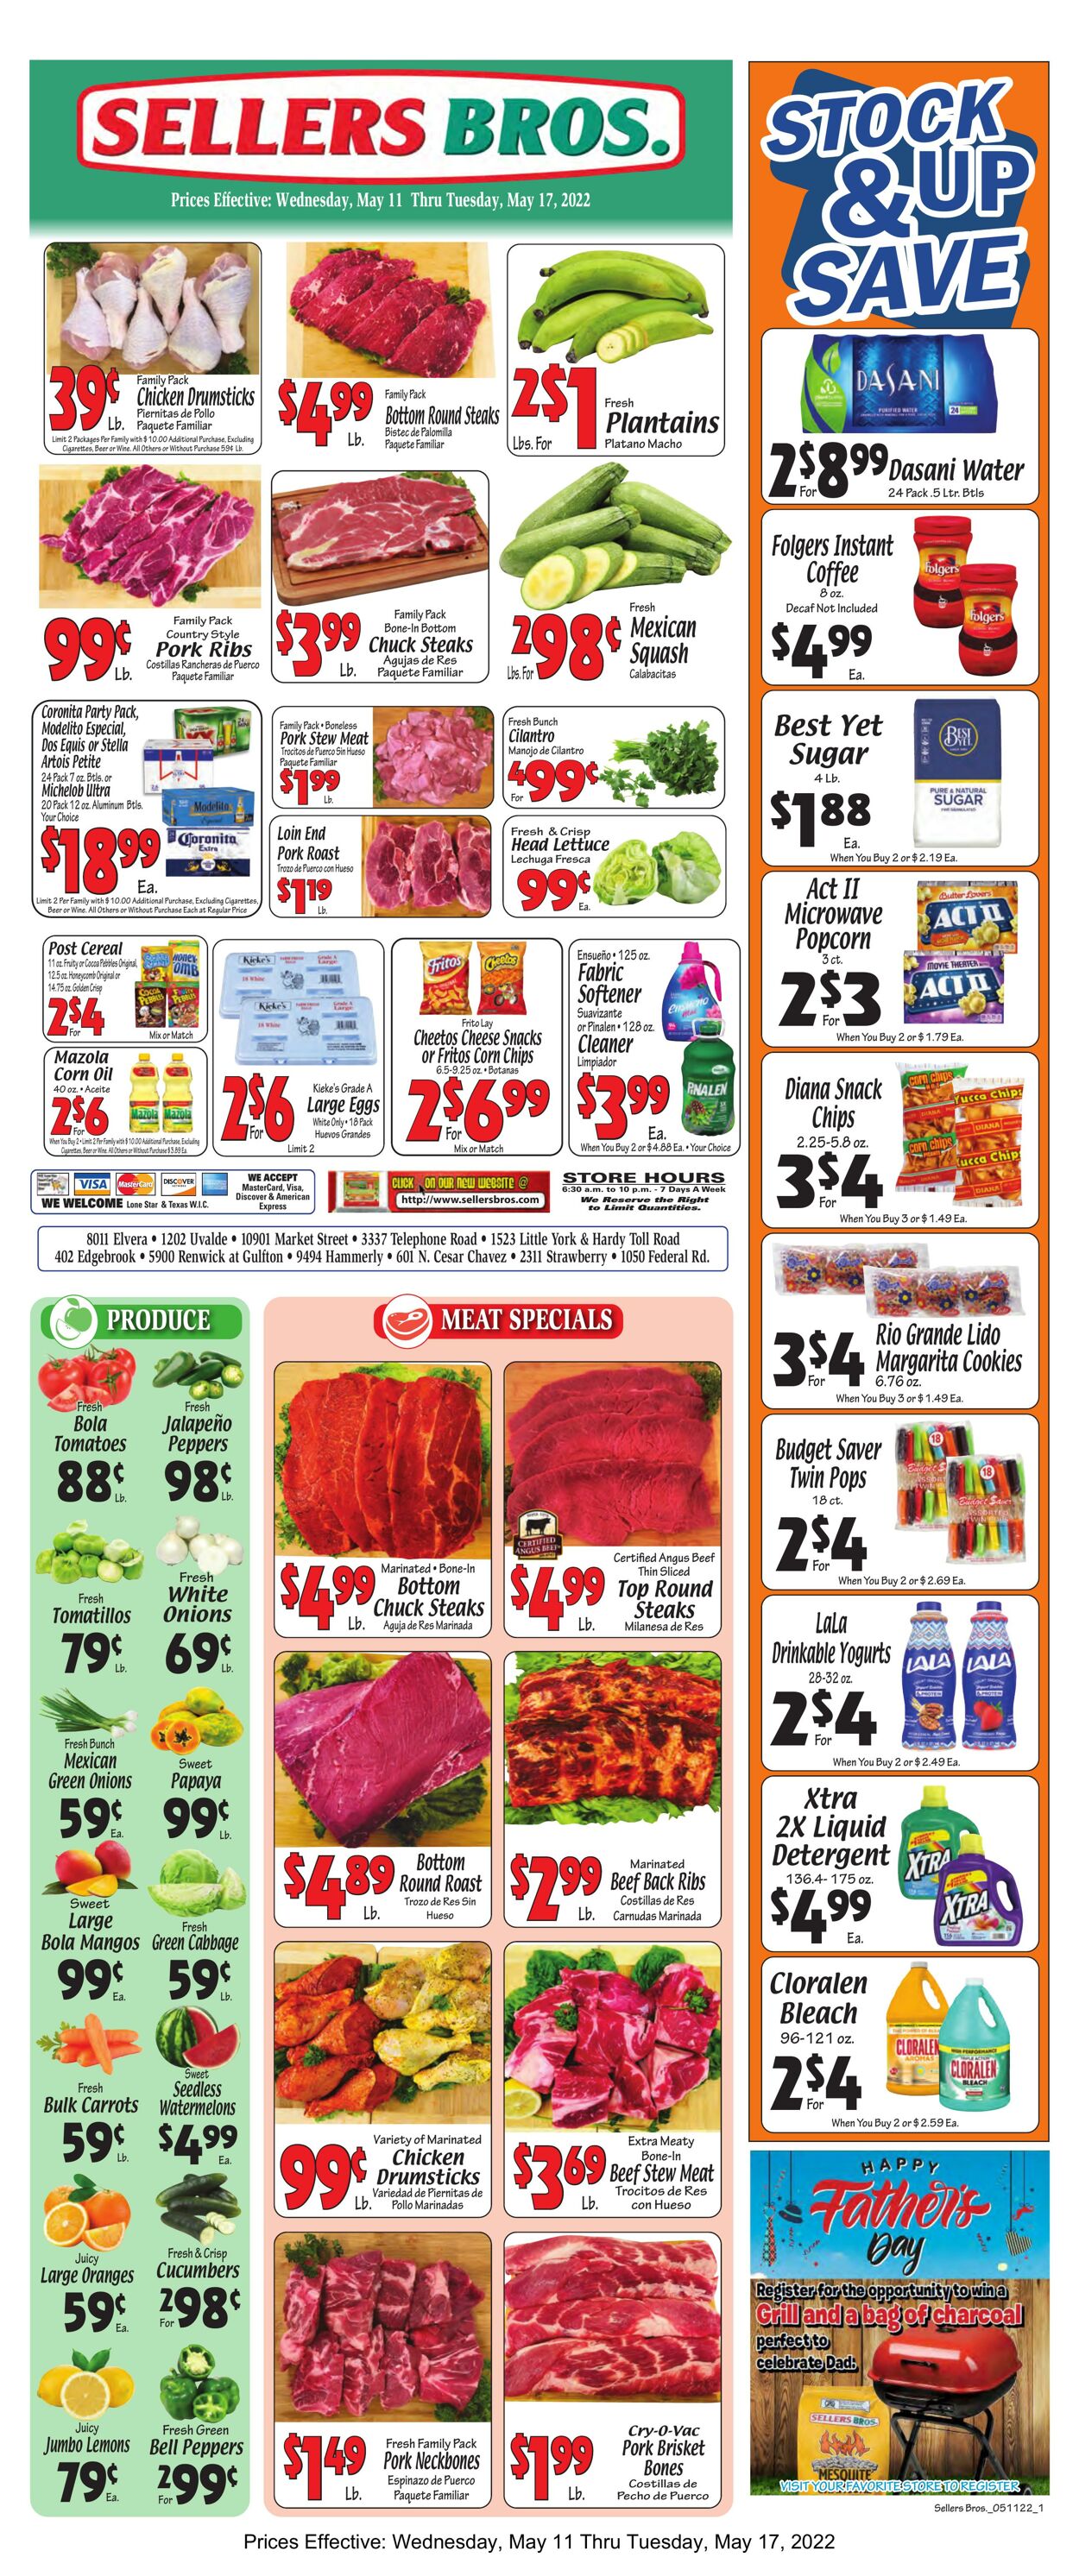 Seller Bros Promotional weekly ads